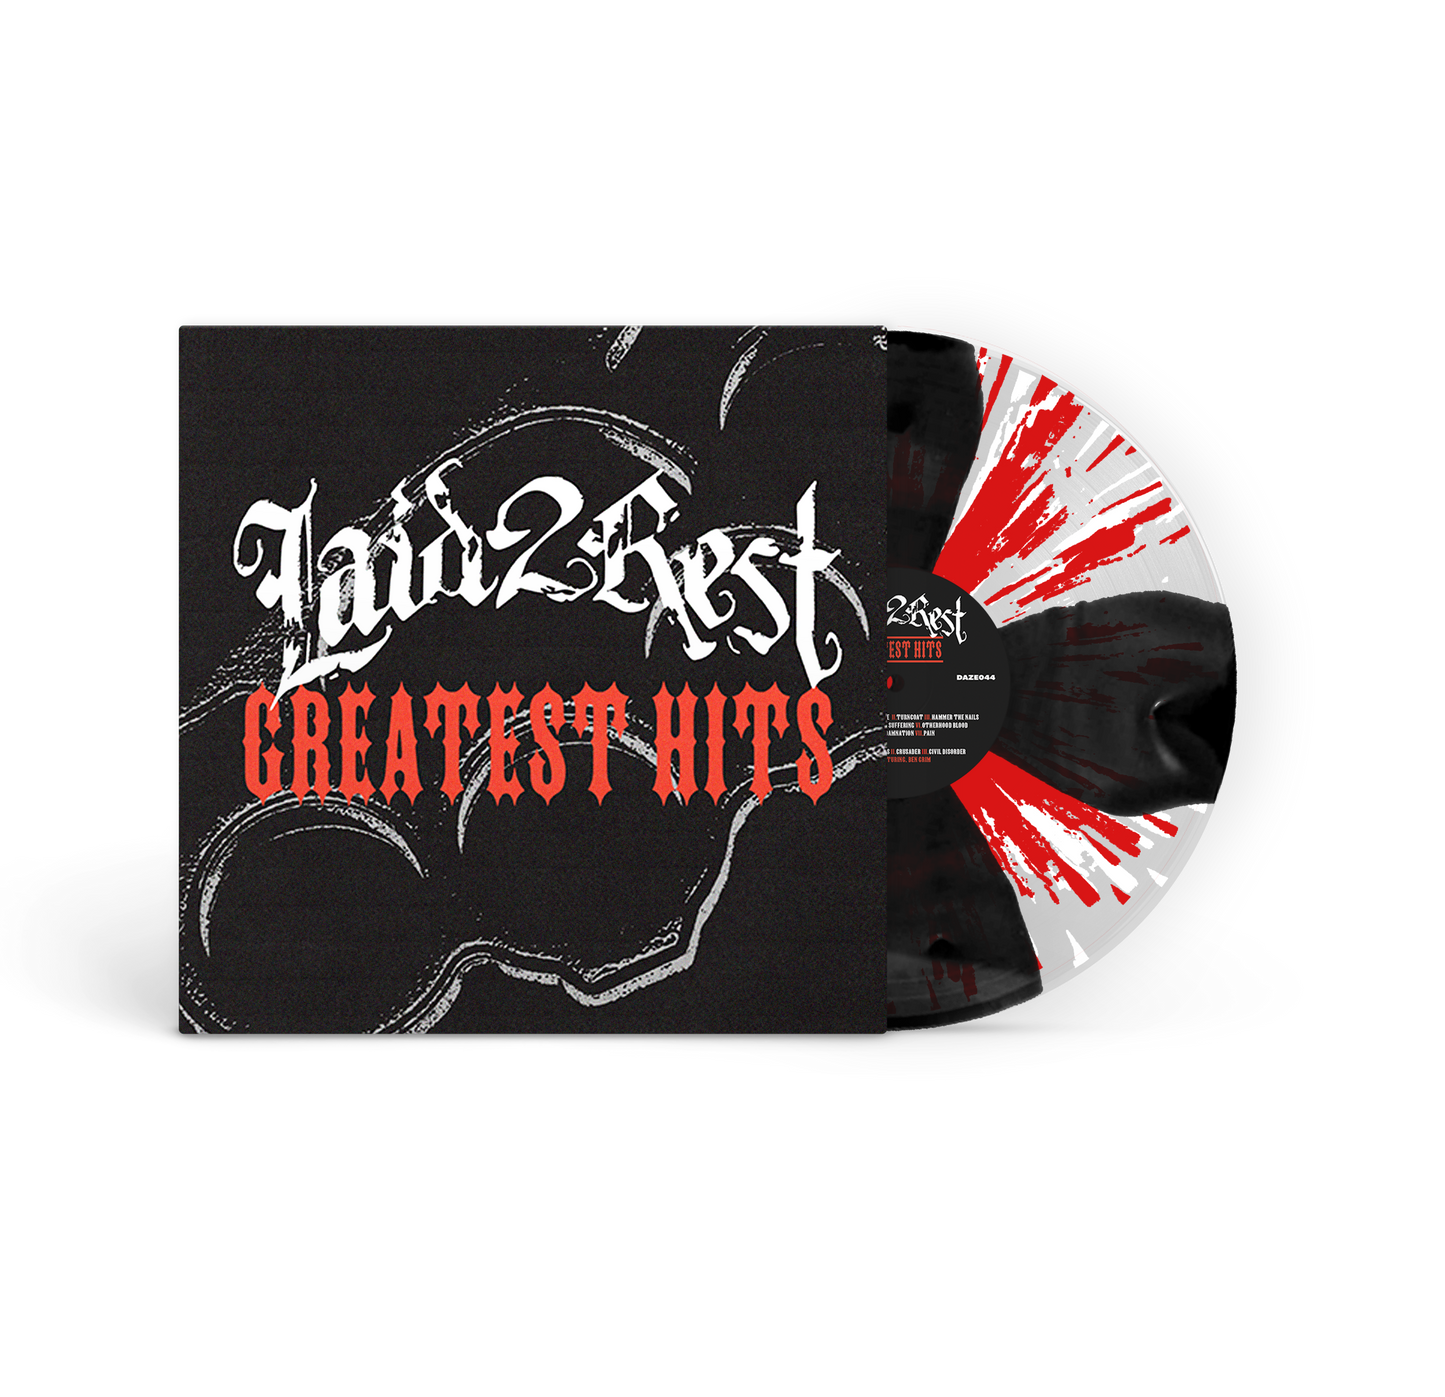 Laid 2 Rest - Greatest Hits 12" LP/CD